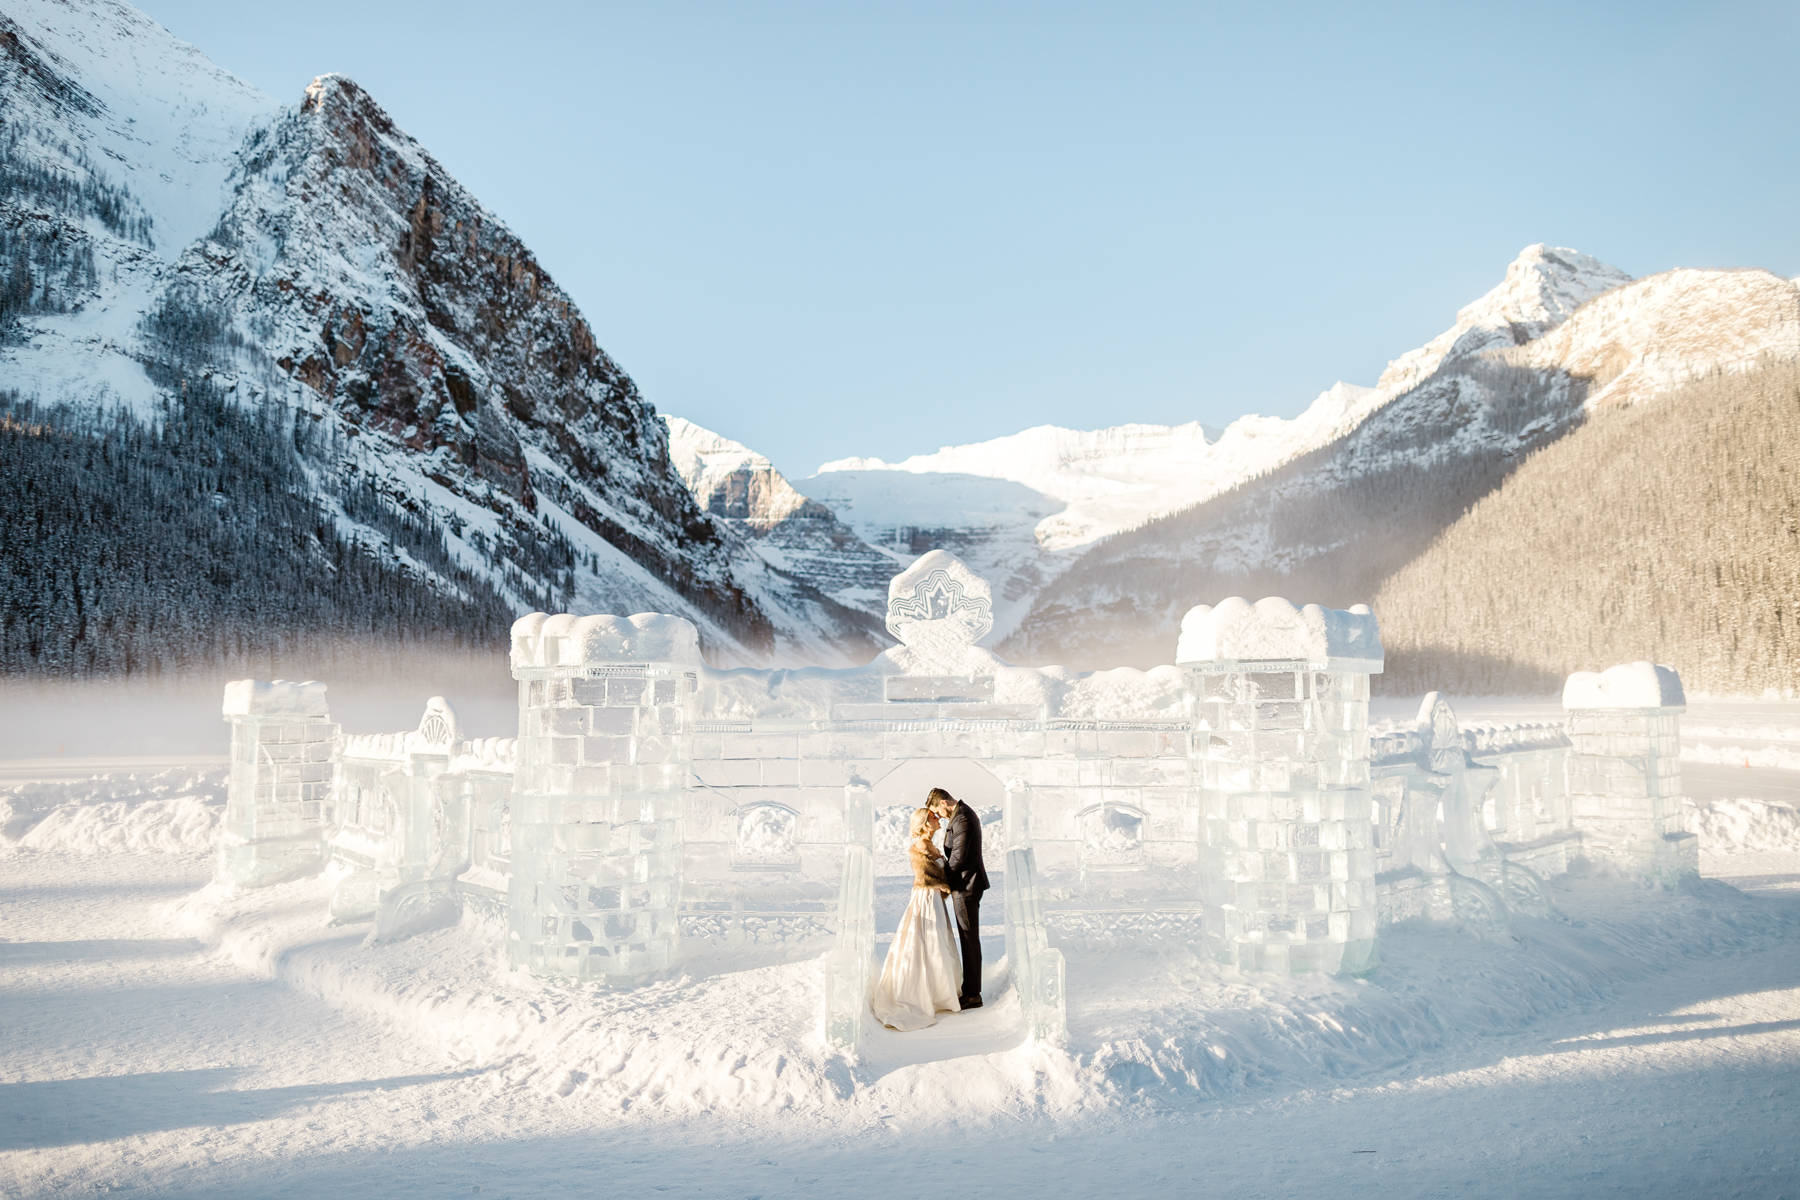 Fairmont Chateau Lake Louise Wedding Photography in Winter for Honeymoon